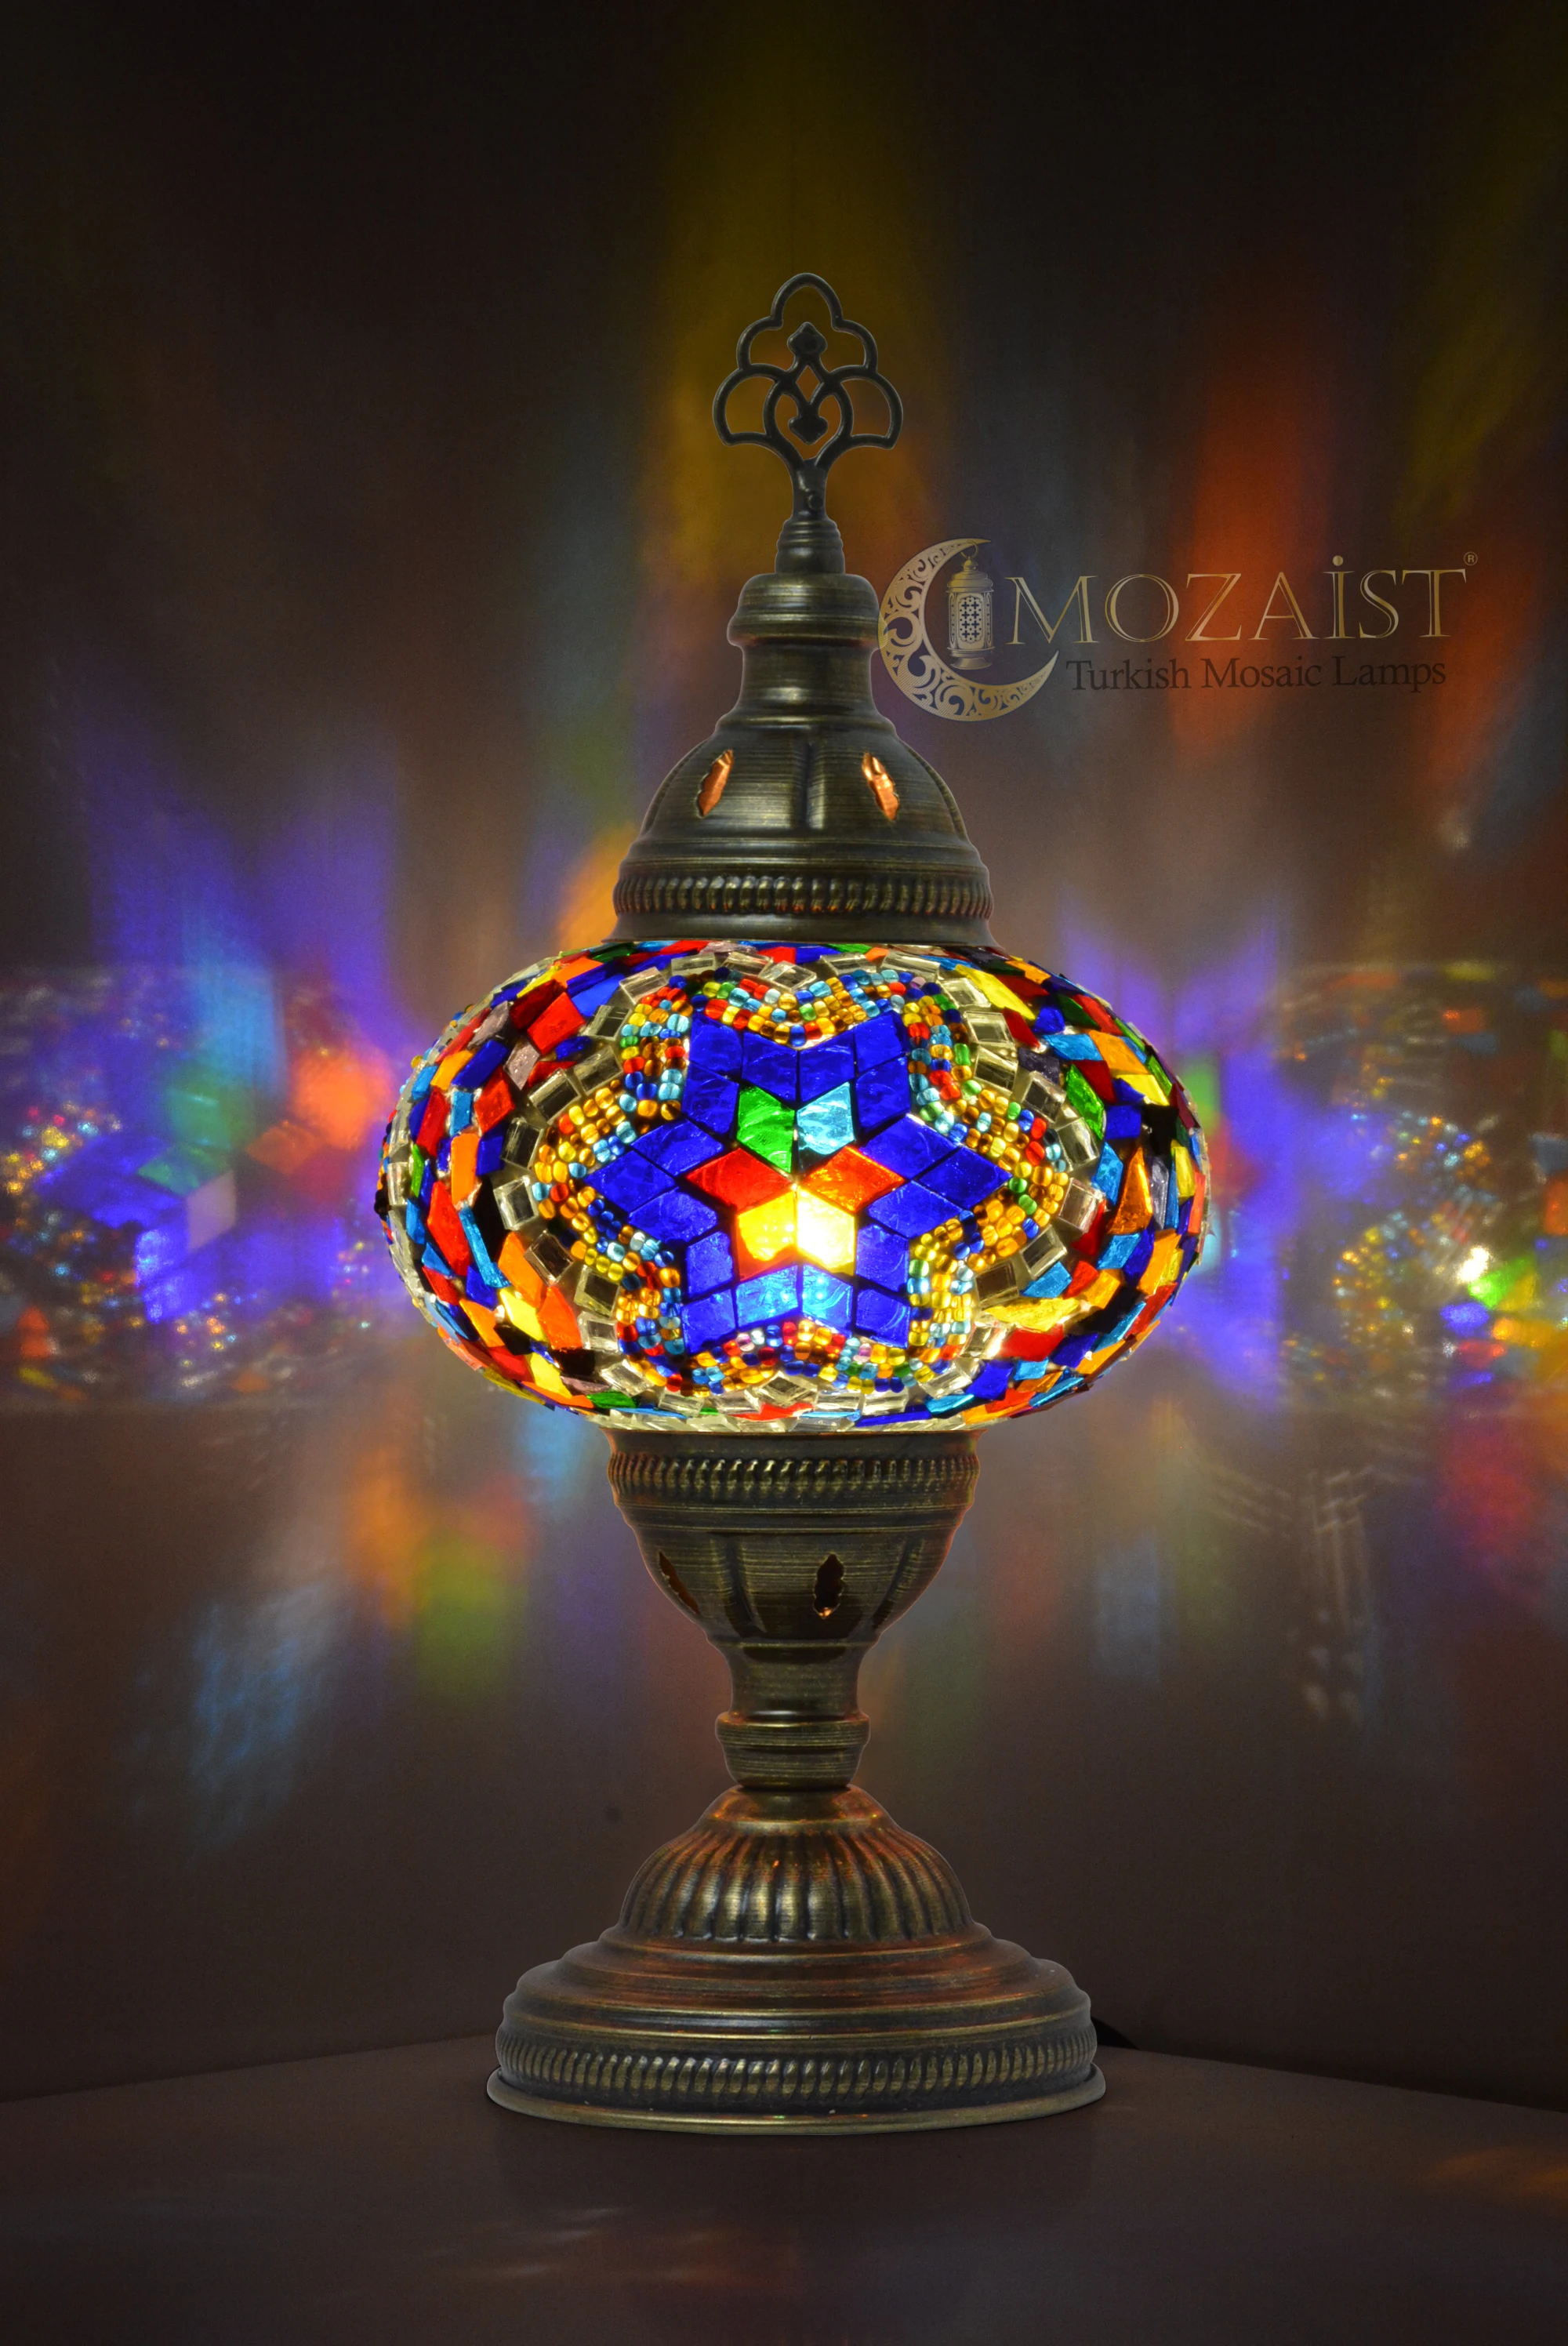 MOZAIST Turkish Lamp 8 COLOR Mosaic Table Lamp Antique Moroccan Decorative Glass Bohemian Vintage Light Shade, Tiffany Bedside enlarge